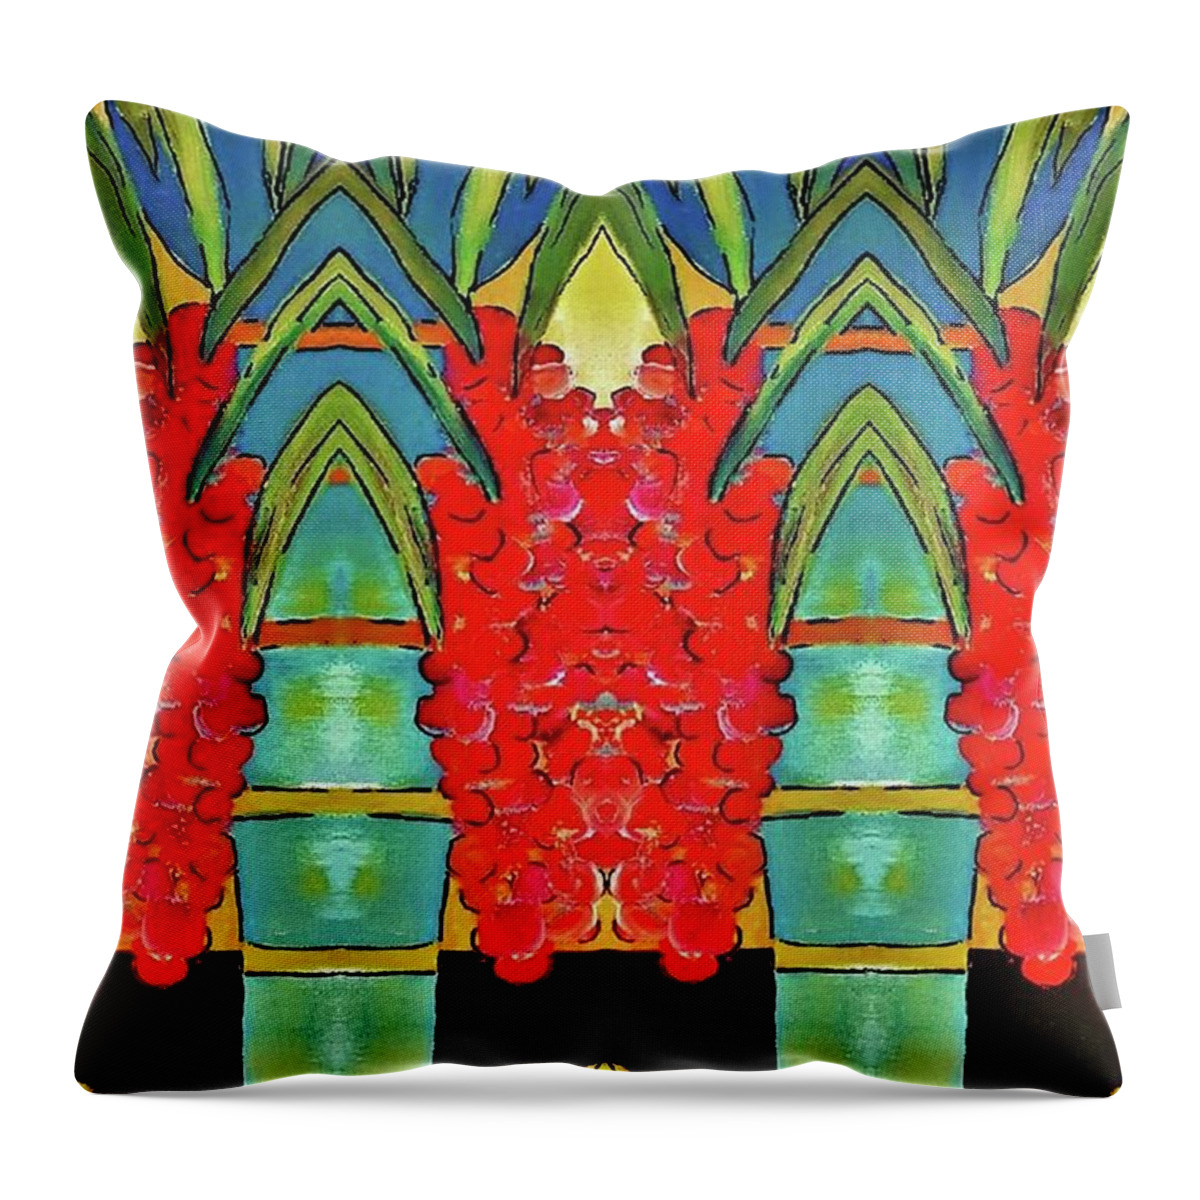 Palms Throw Pillow featuring the digital art Deco Palms by Tracey Lee Cassin